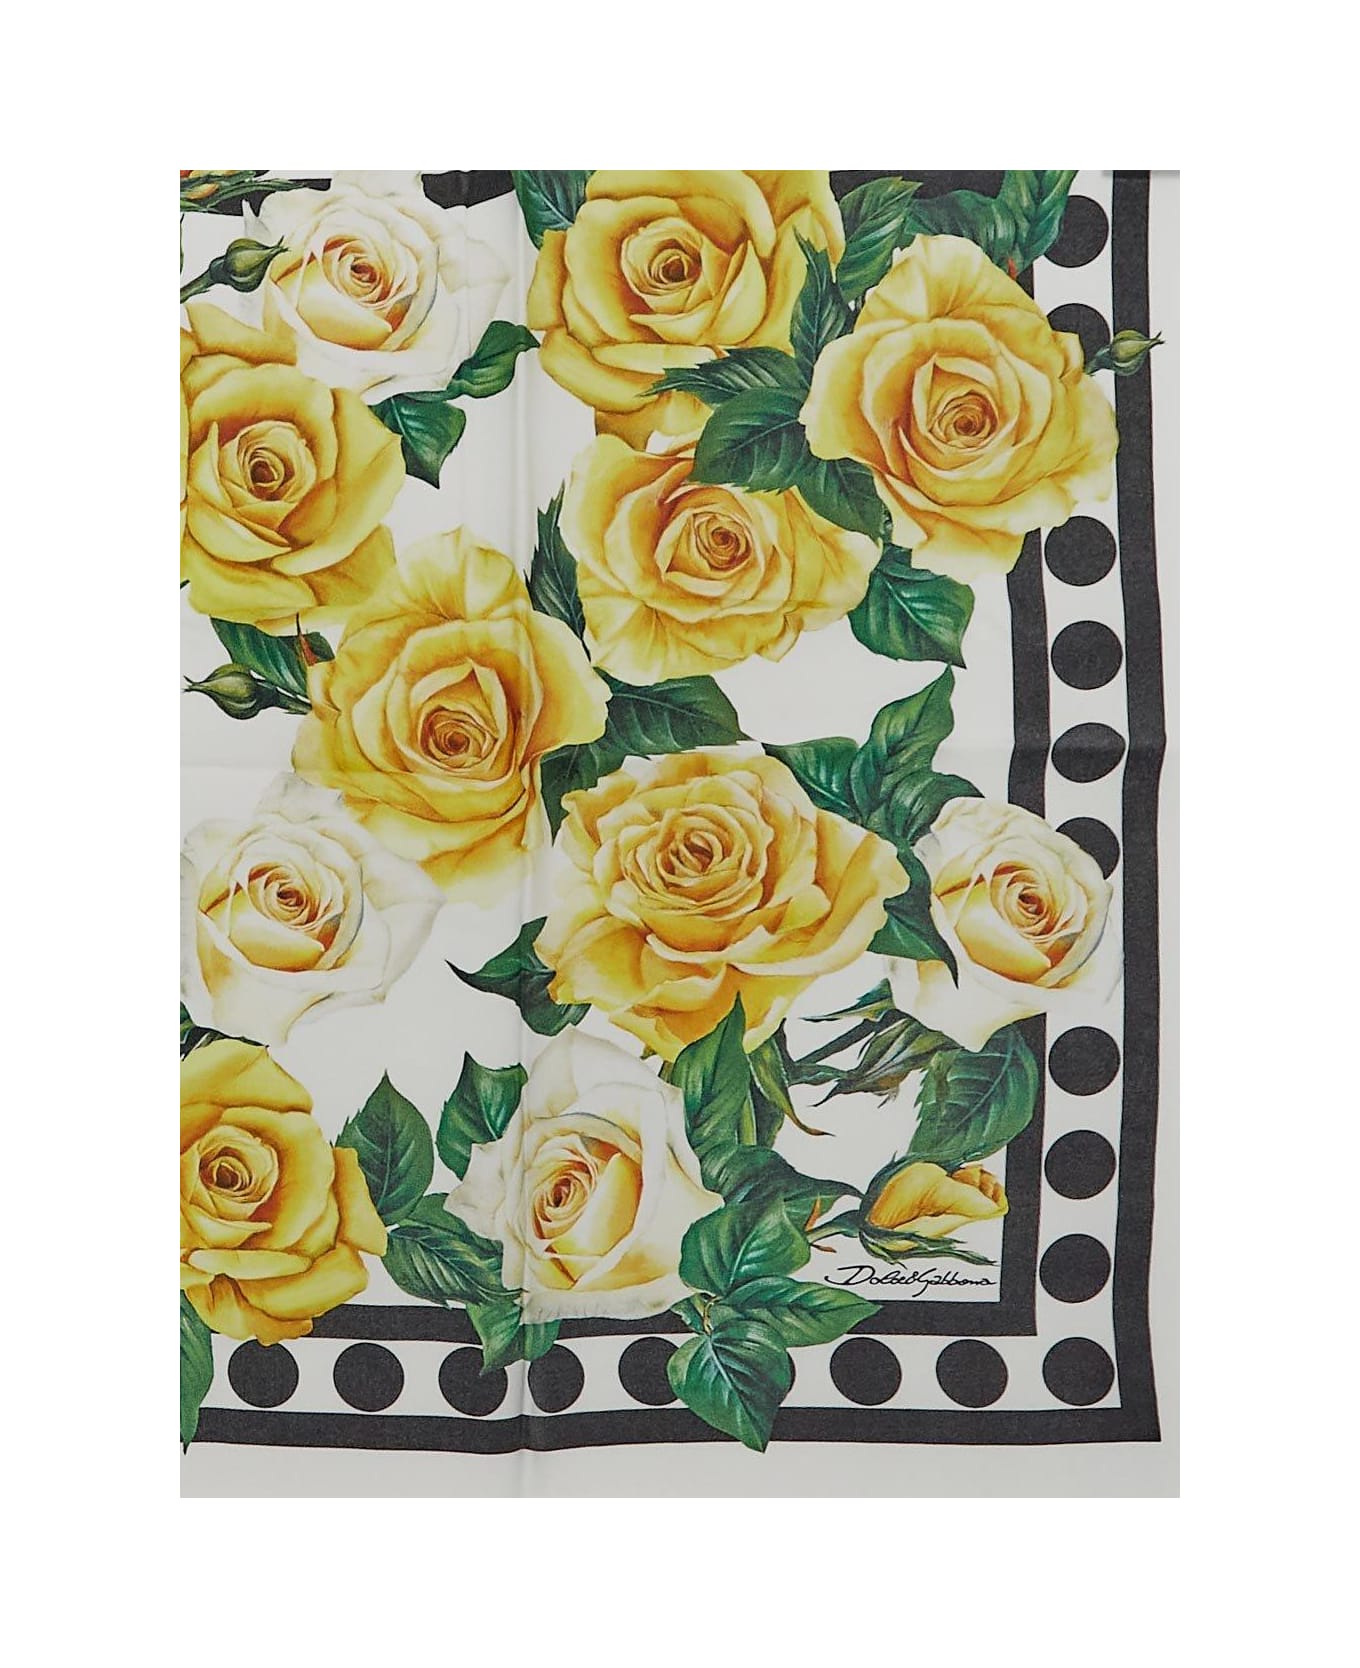 Dolce & Gabbana Floral Printed Square Scarf - Rose gialle fdo bco スカーフ＆ストール